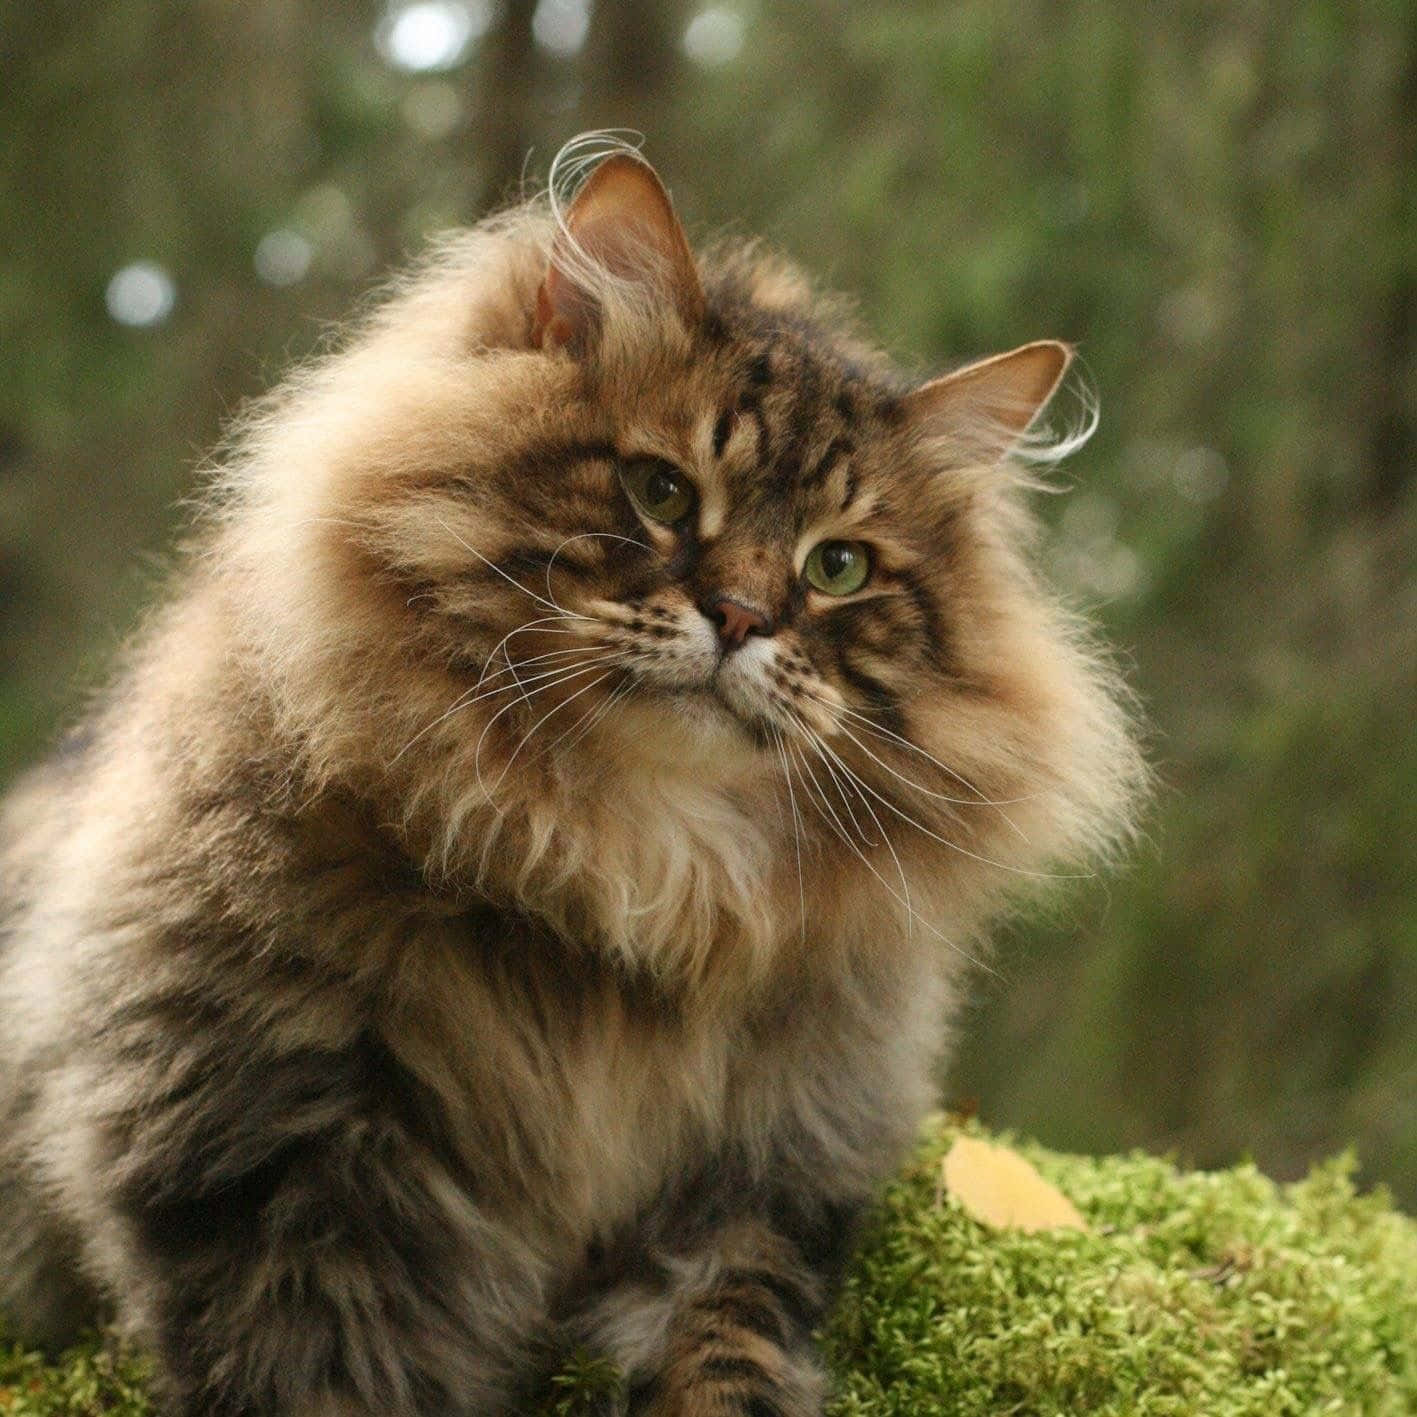 American Bobtail cat showing off its distinctive tail and striking coat Wallpaper